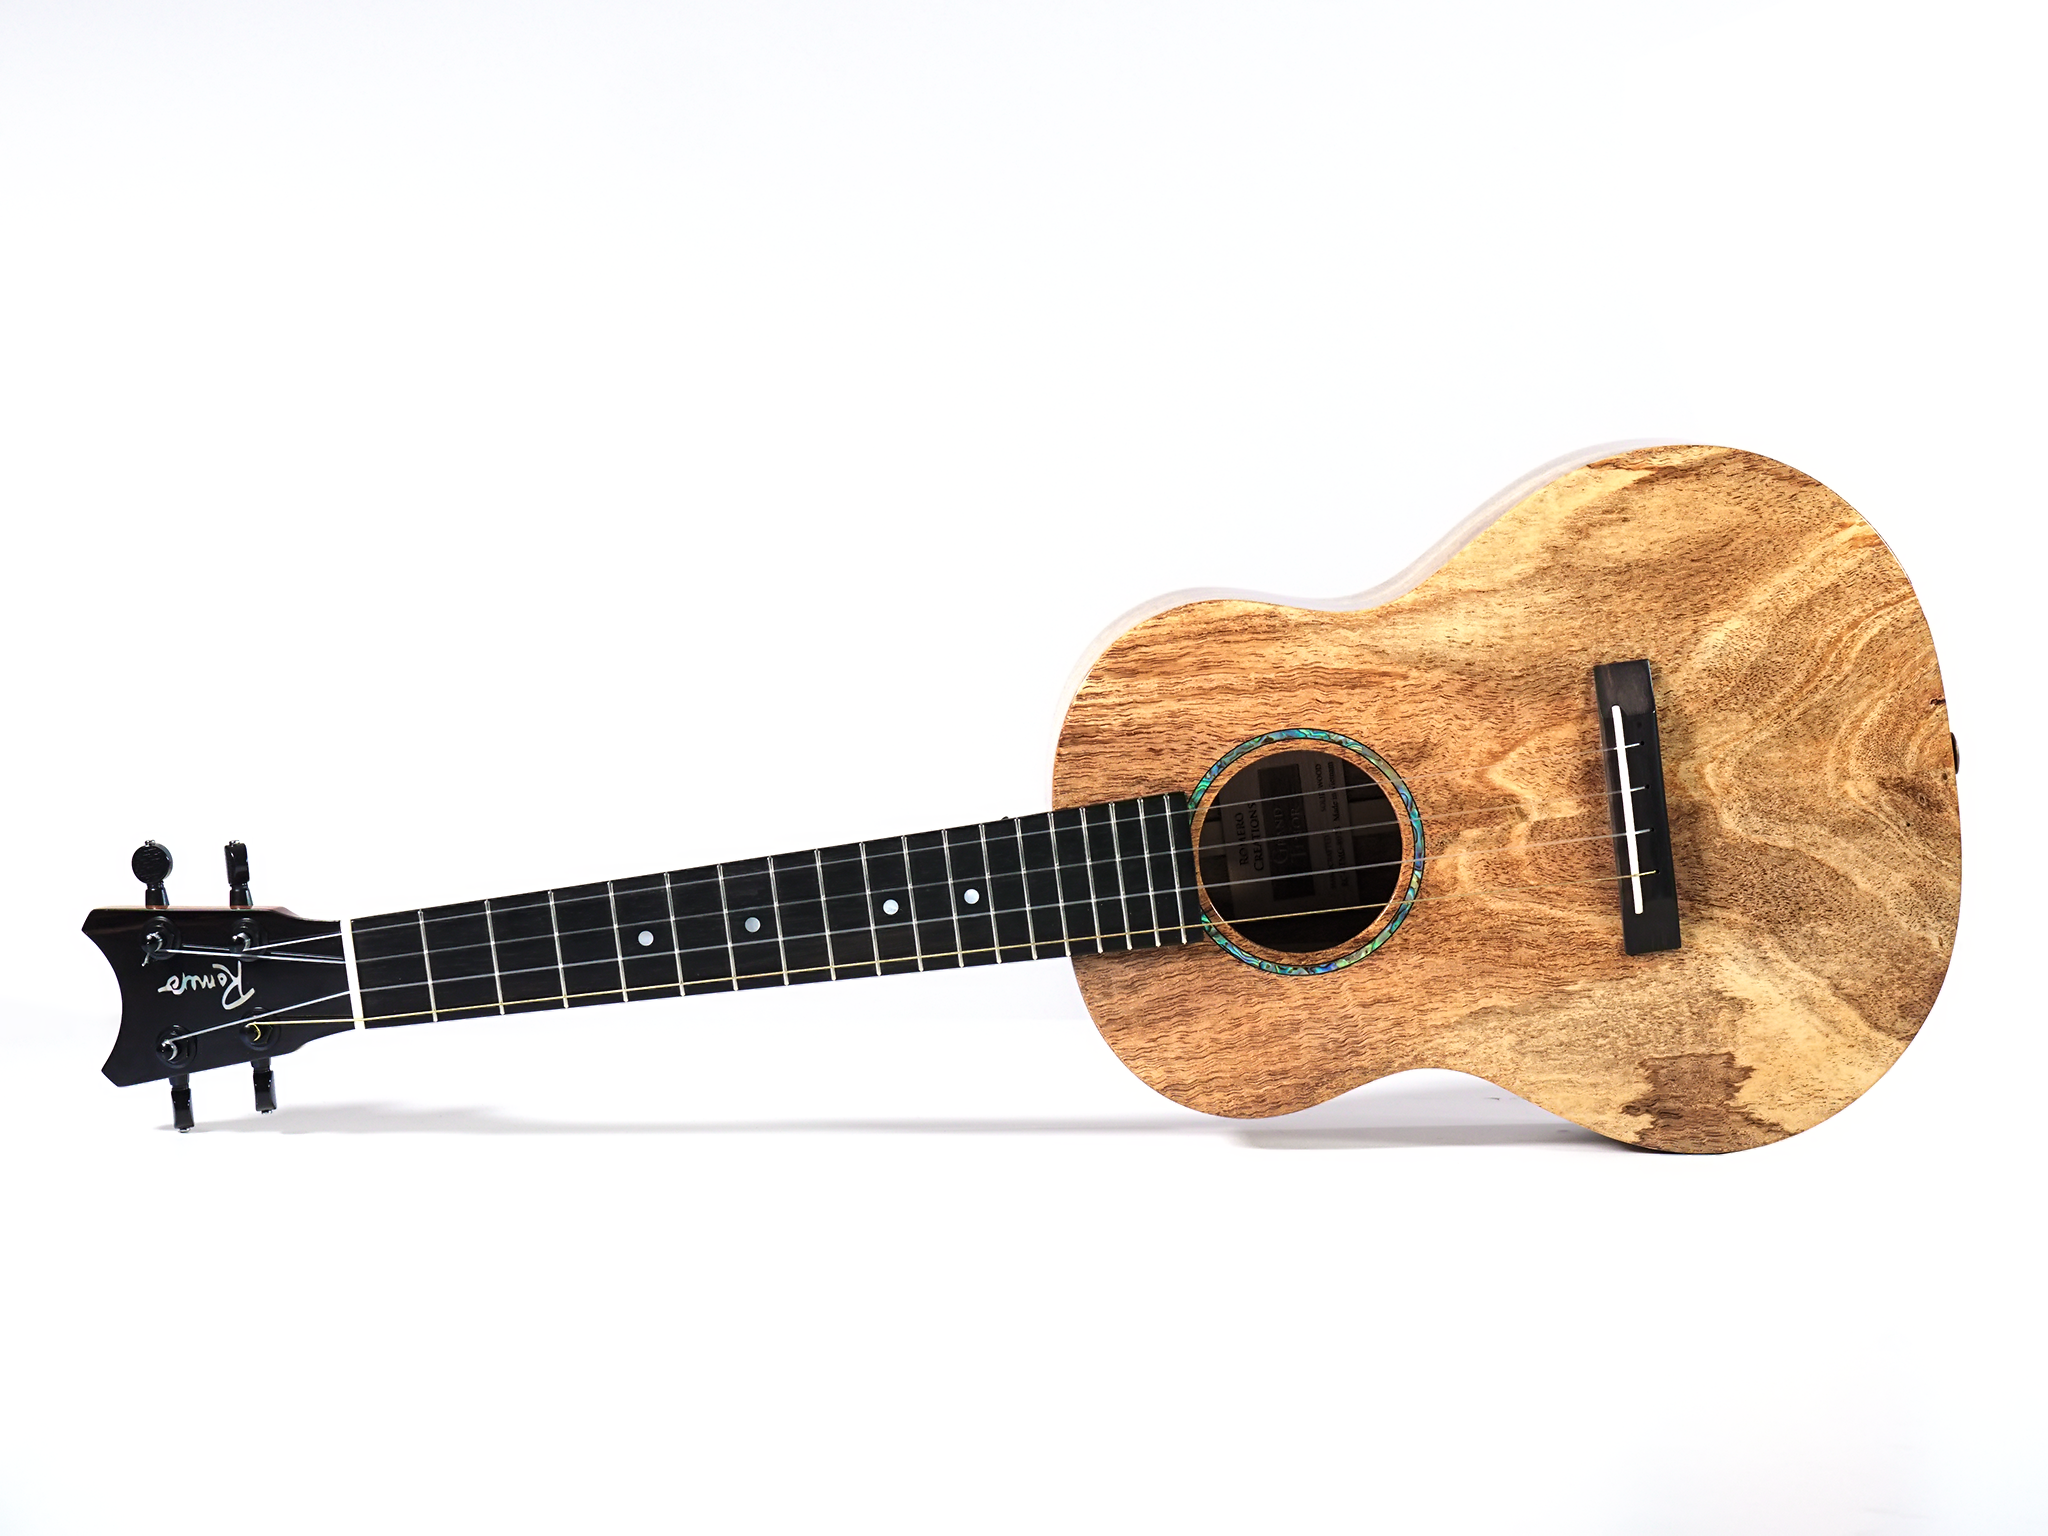 [PRE-OWNED] Romero Creations RC-GT-MG Grand Tenor Spalted Mango Ukulele "Butter Rum" LR Baggs 5.0 Pickup